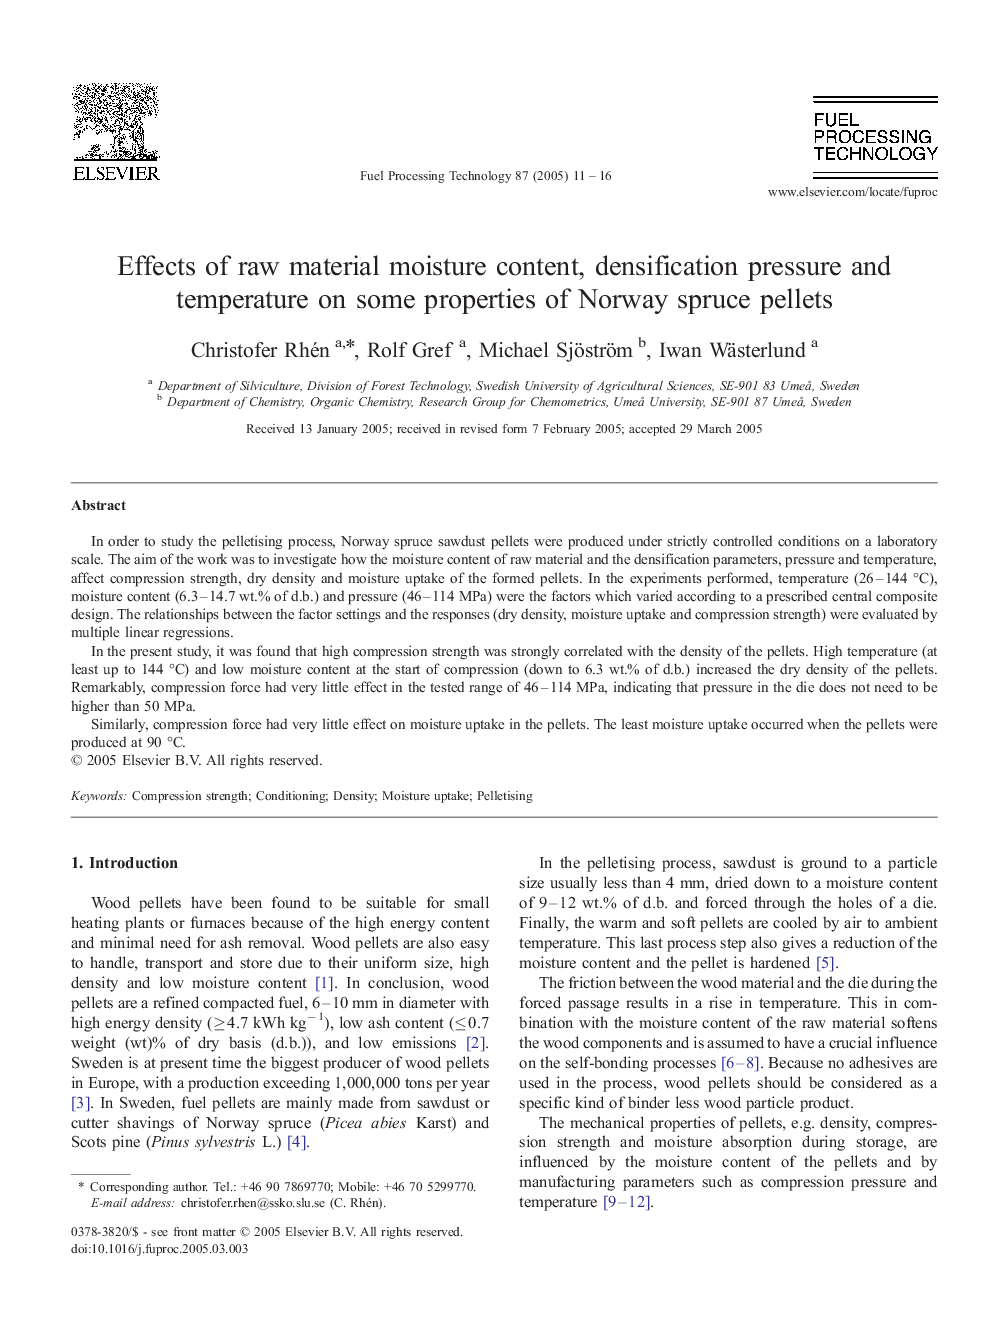 Effects of raw material moisture content, densification pressure and temperature on some properties of Norway spruce pellets